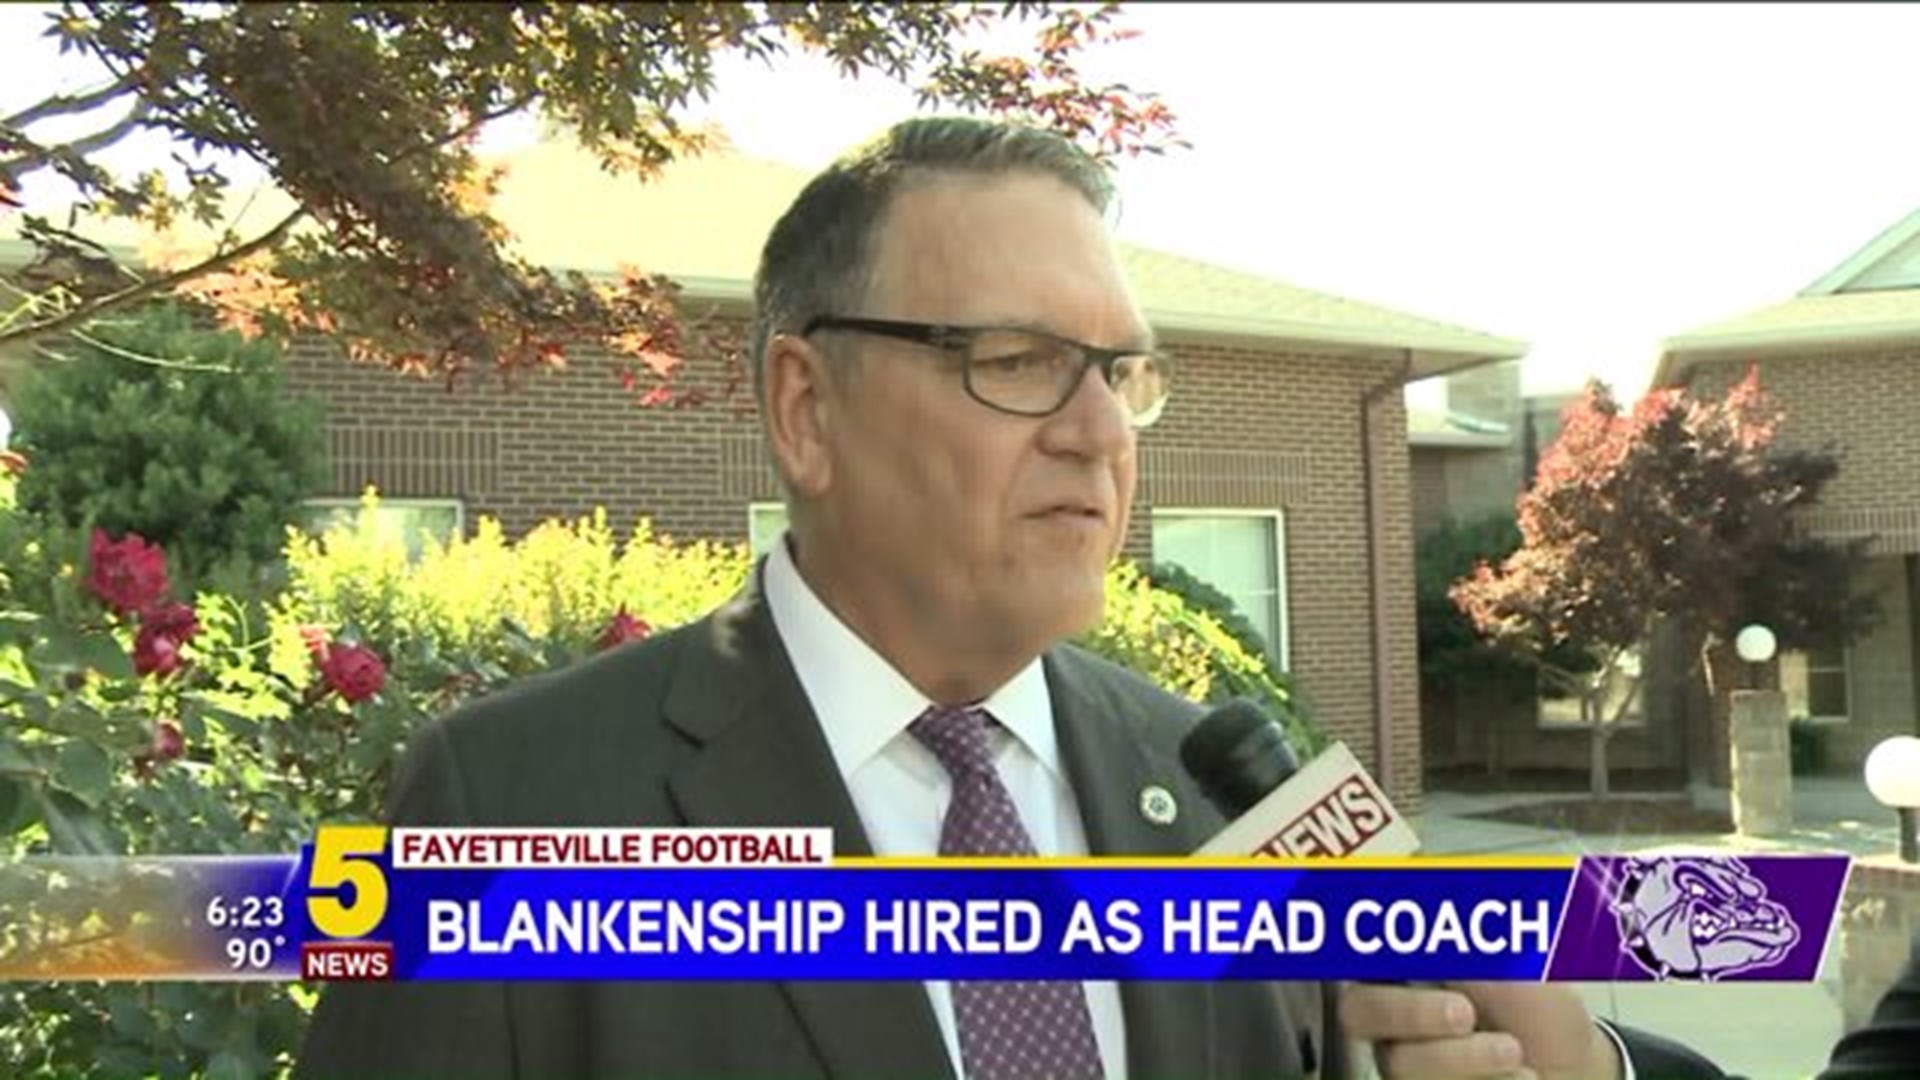 Blankenship Hired As Fayetteville Coach